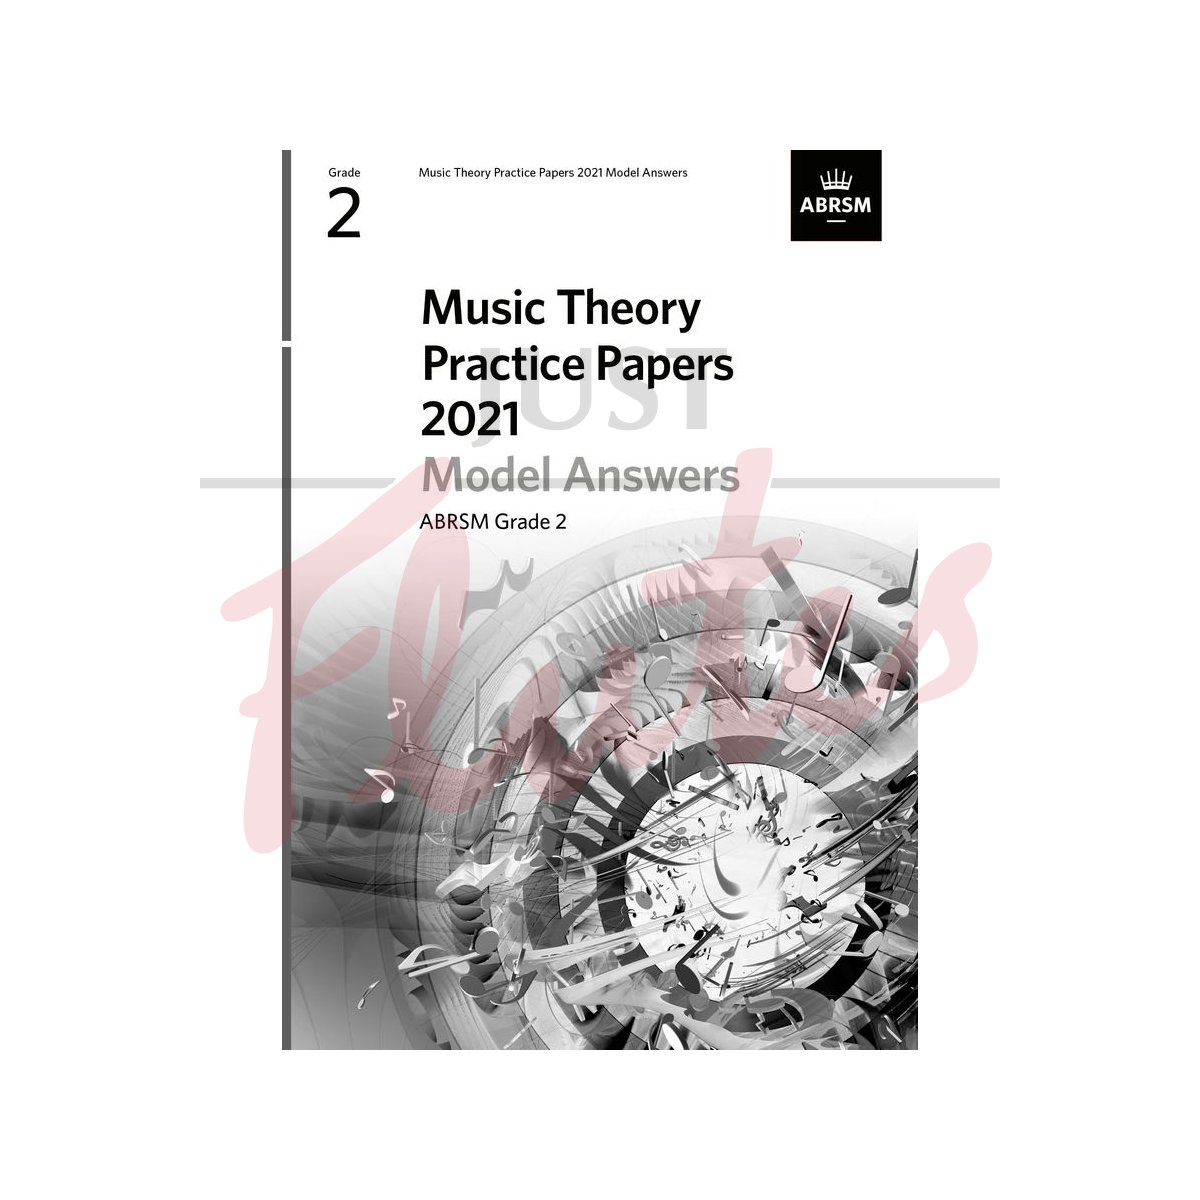 Music Theory Practice Papers 2021 Grade 2 - Model Answers